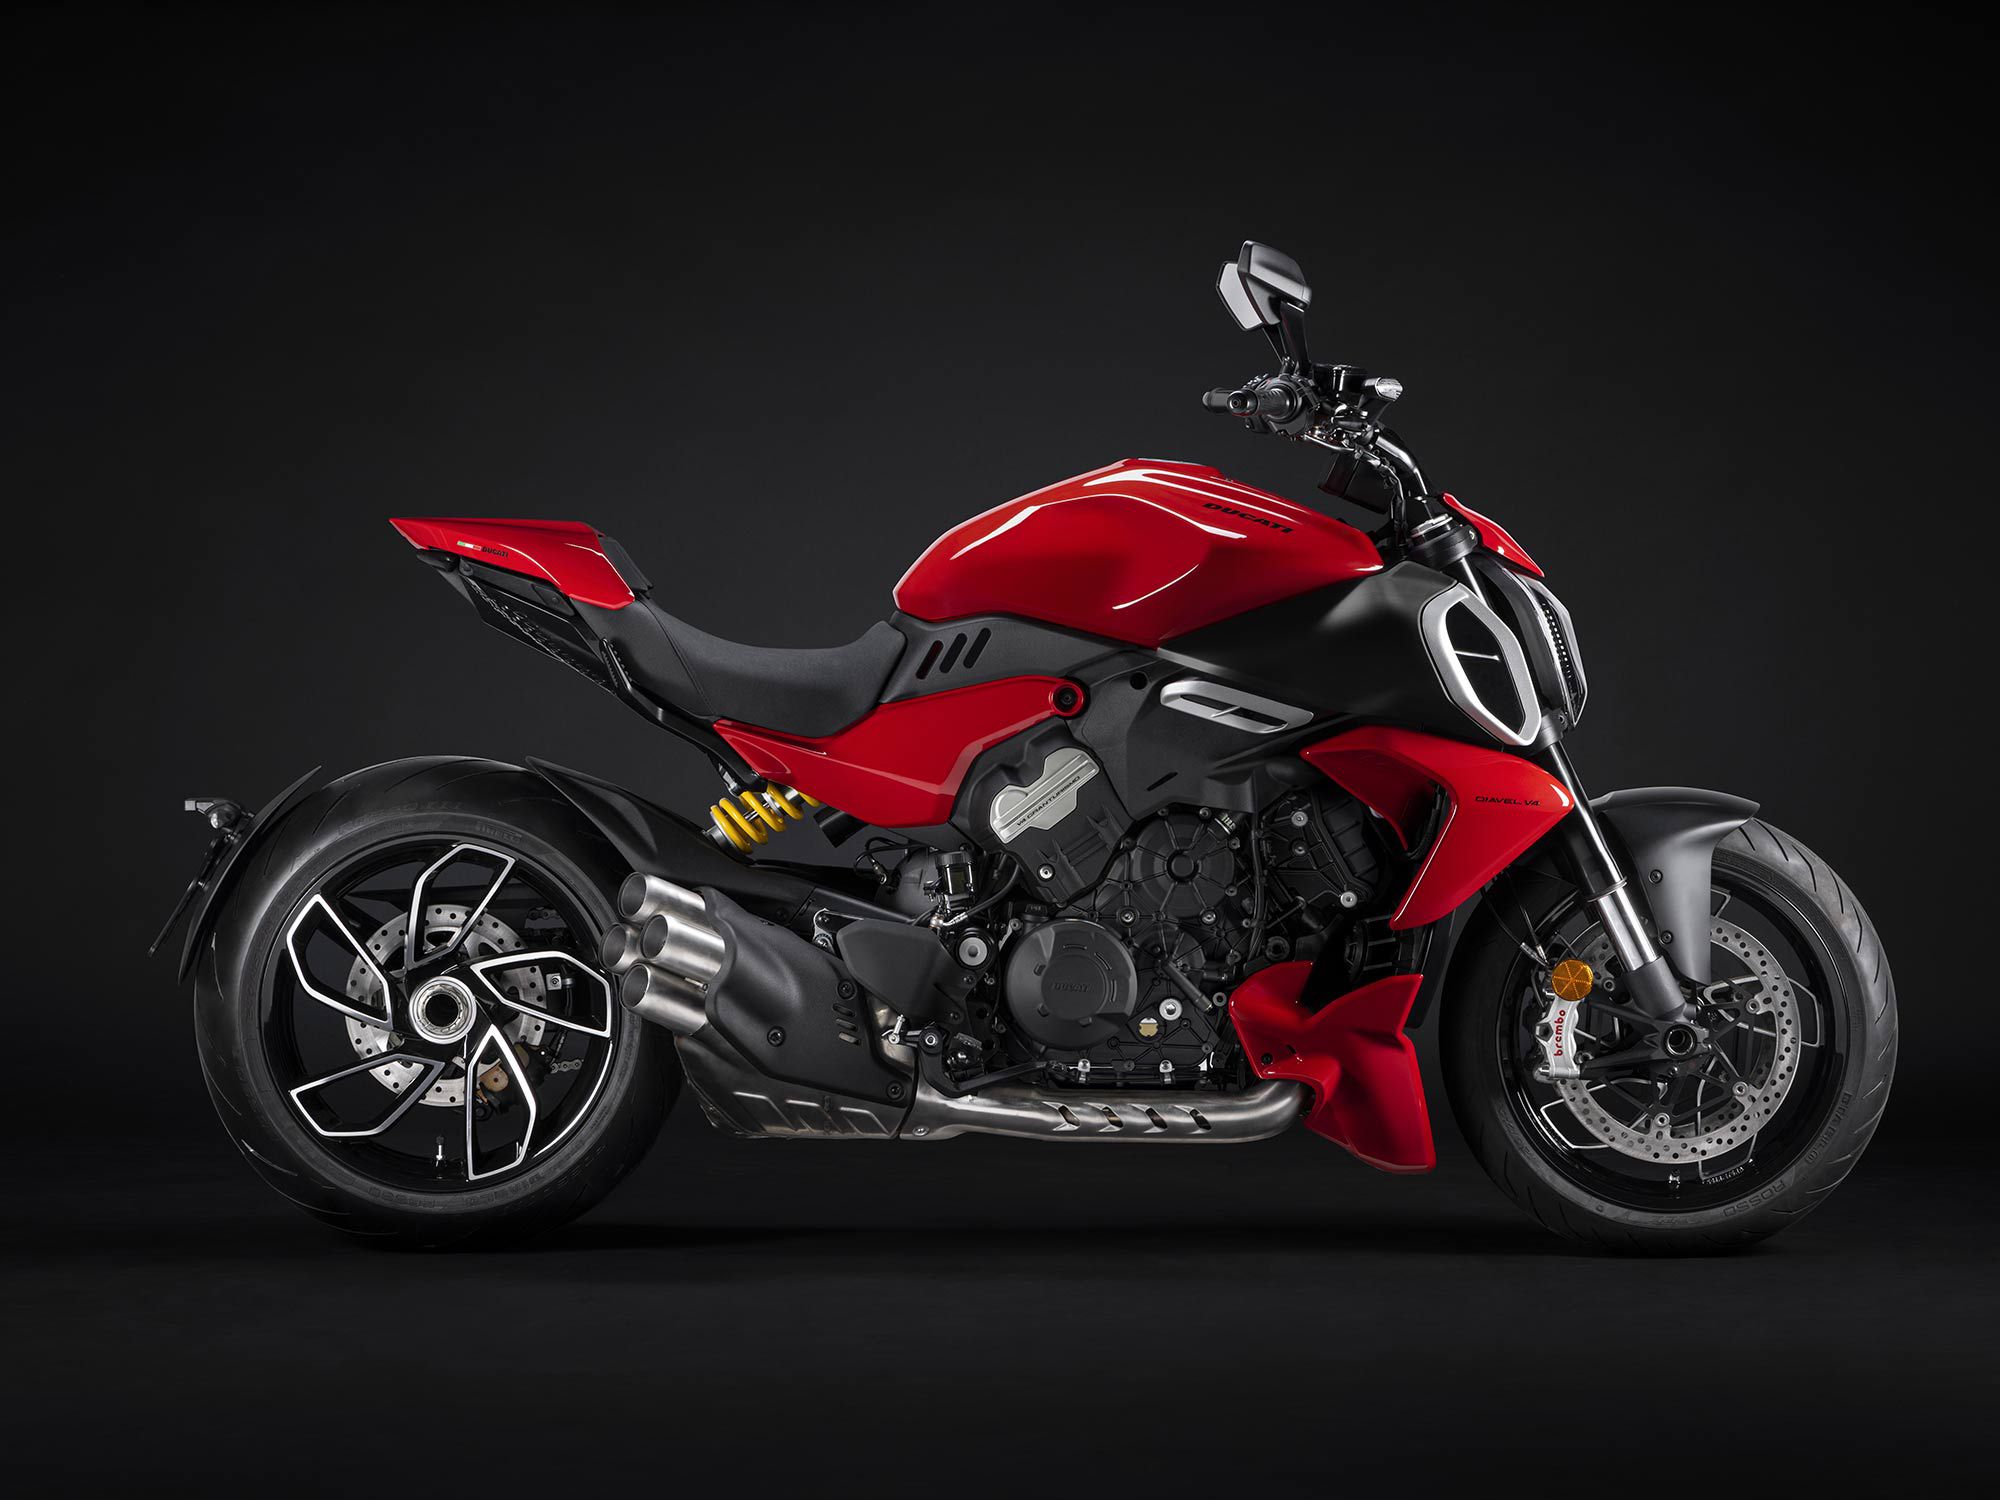 While instantly recognizable as a Diavel, the V4 has entirely new styling compared to previous generations.